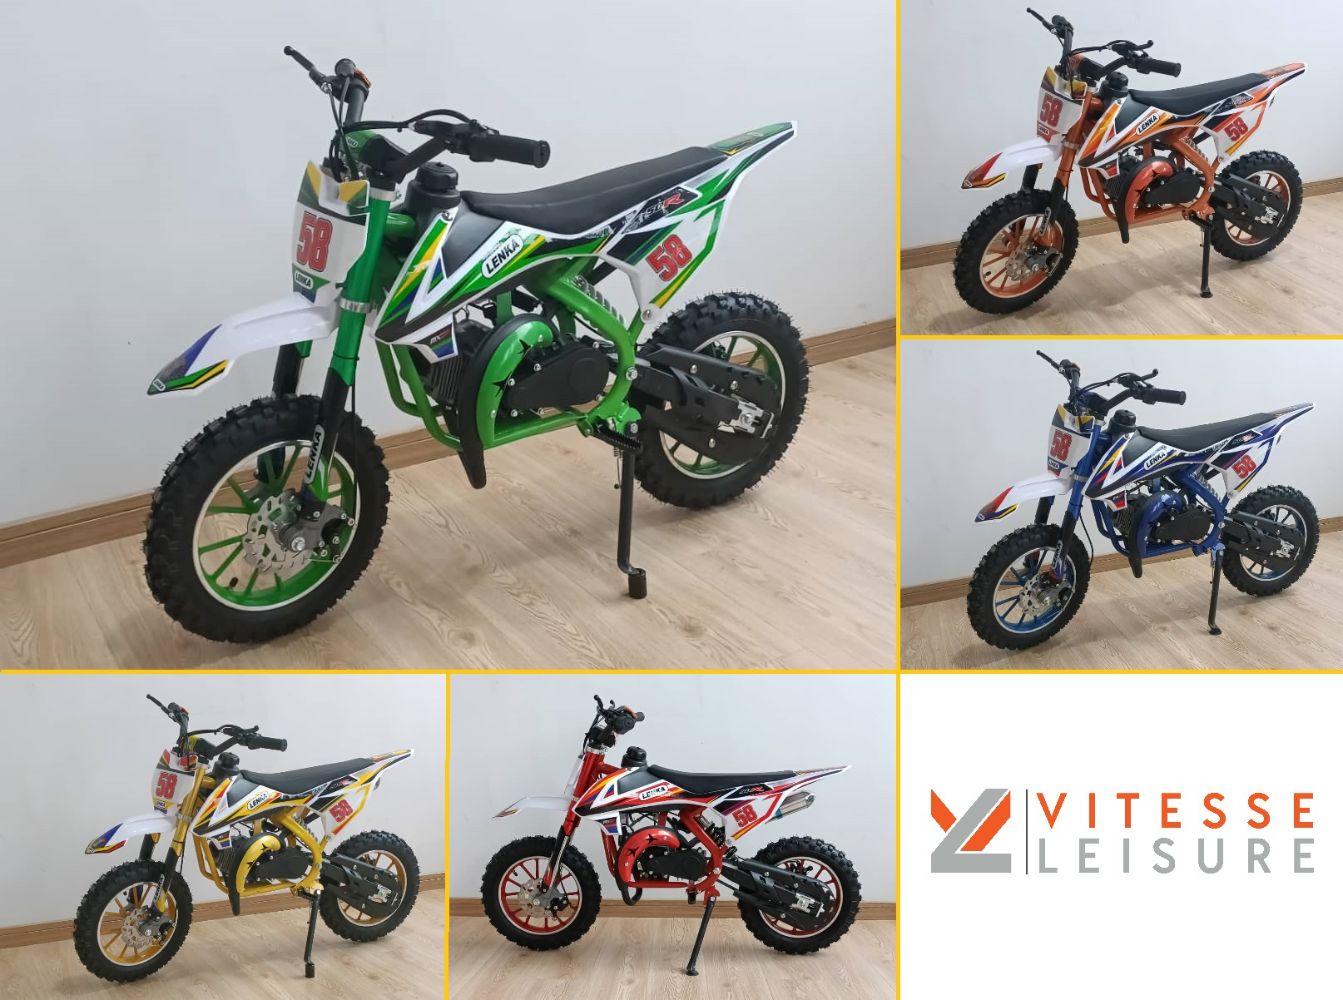 Brand New 2022 Off Road Petrol Dirt Bikes - Cancelled Order Direct From Manufacturer - Over £152K Of Retail Stock To Be Sold